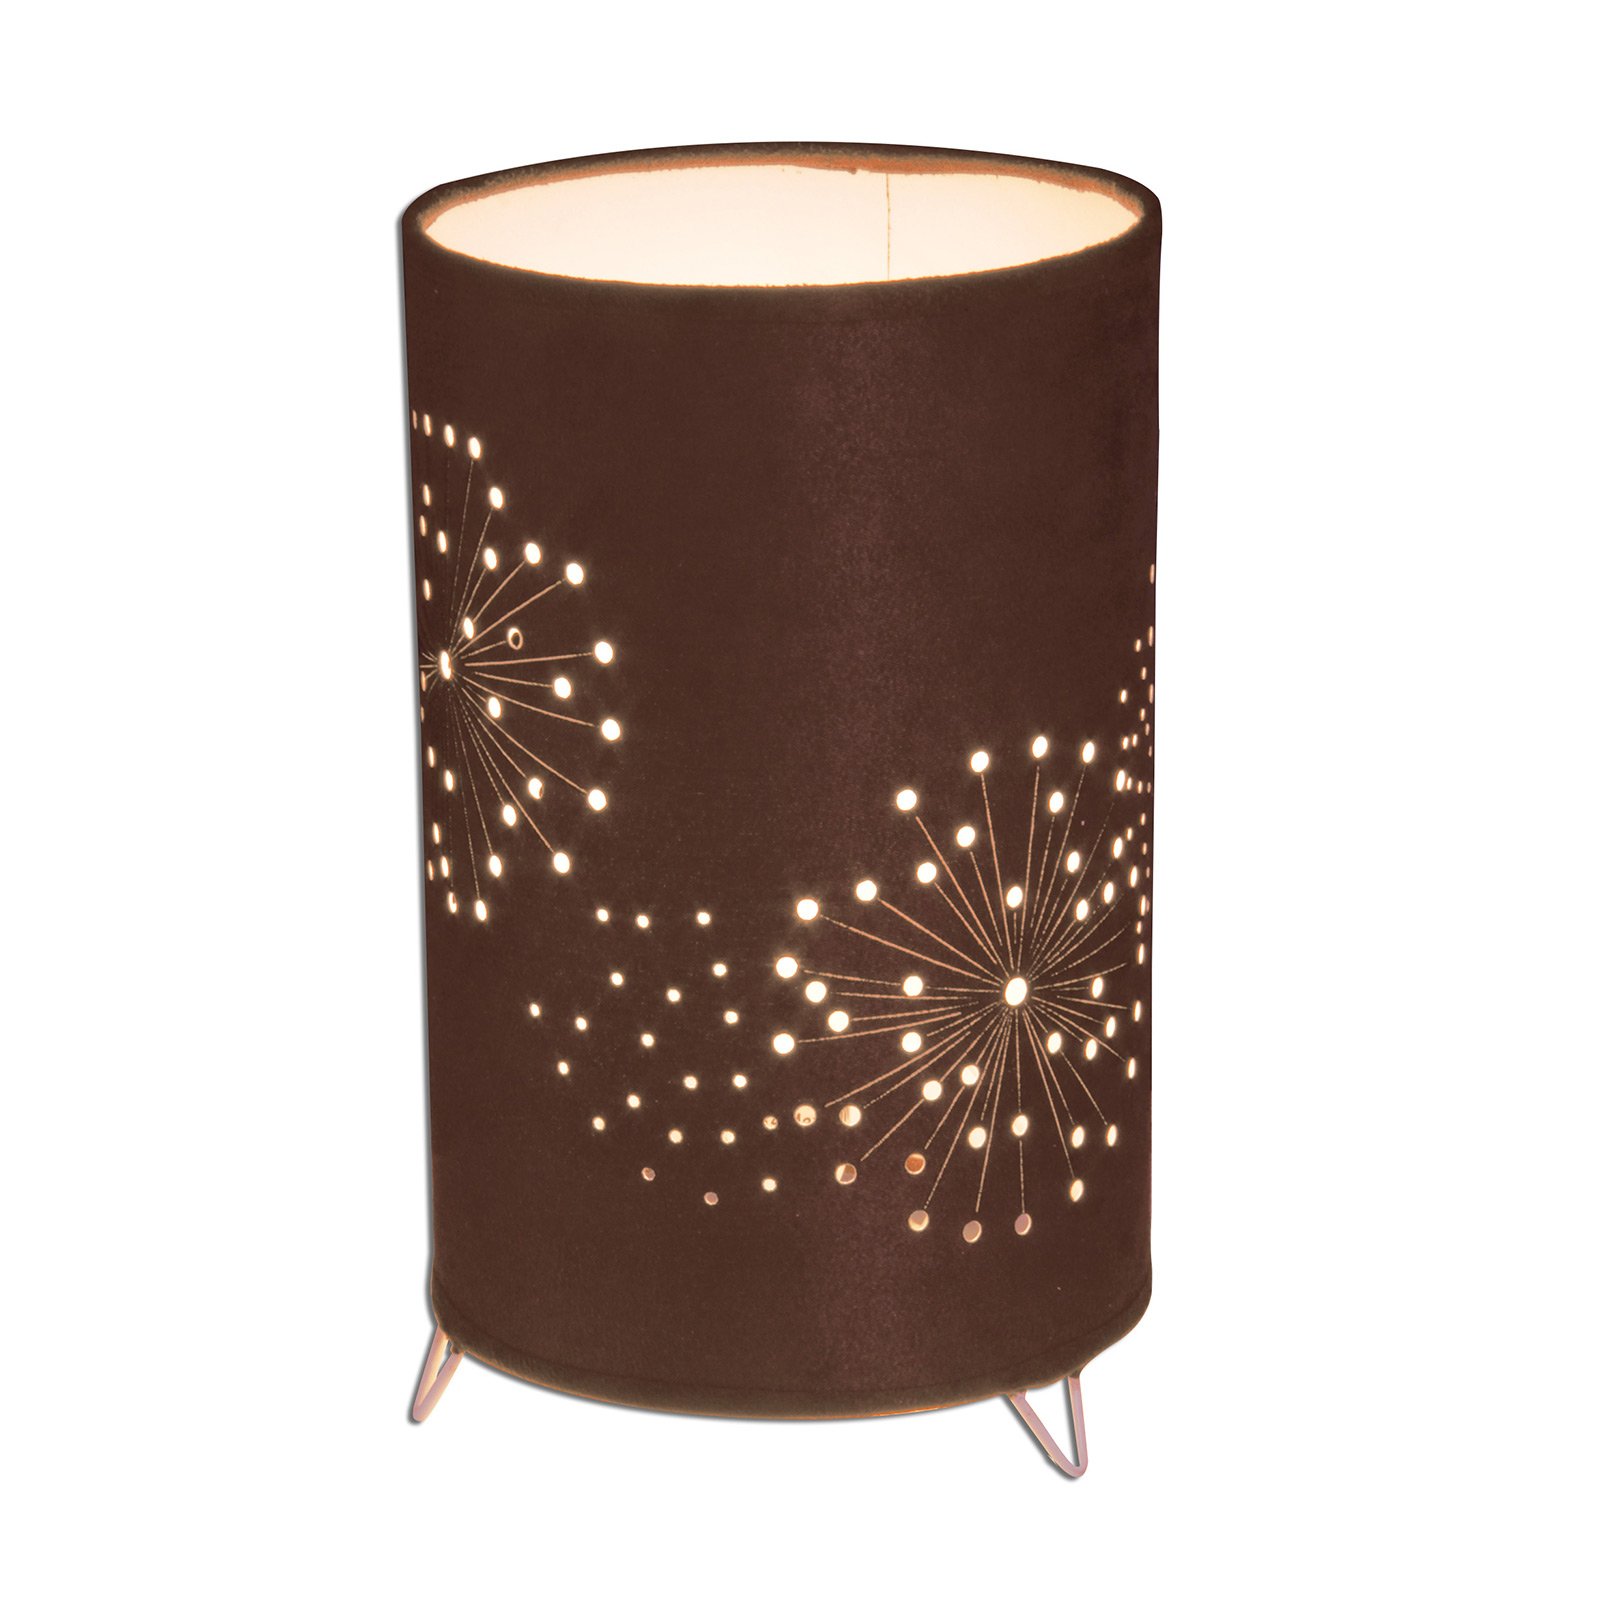 Aurona table lamp made of brown fabric